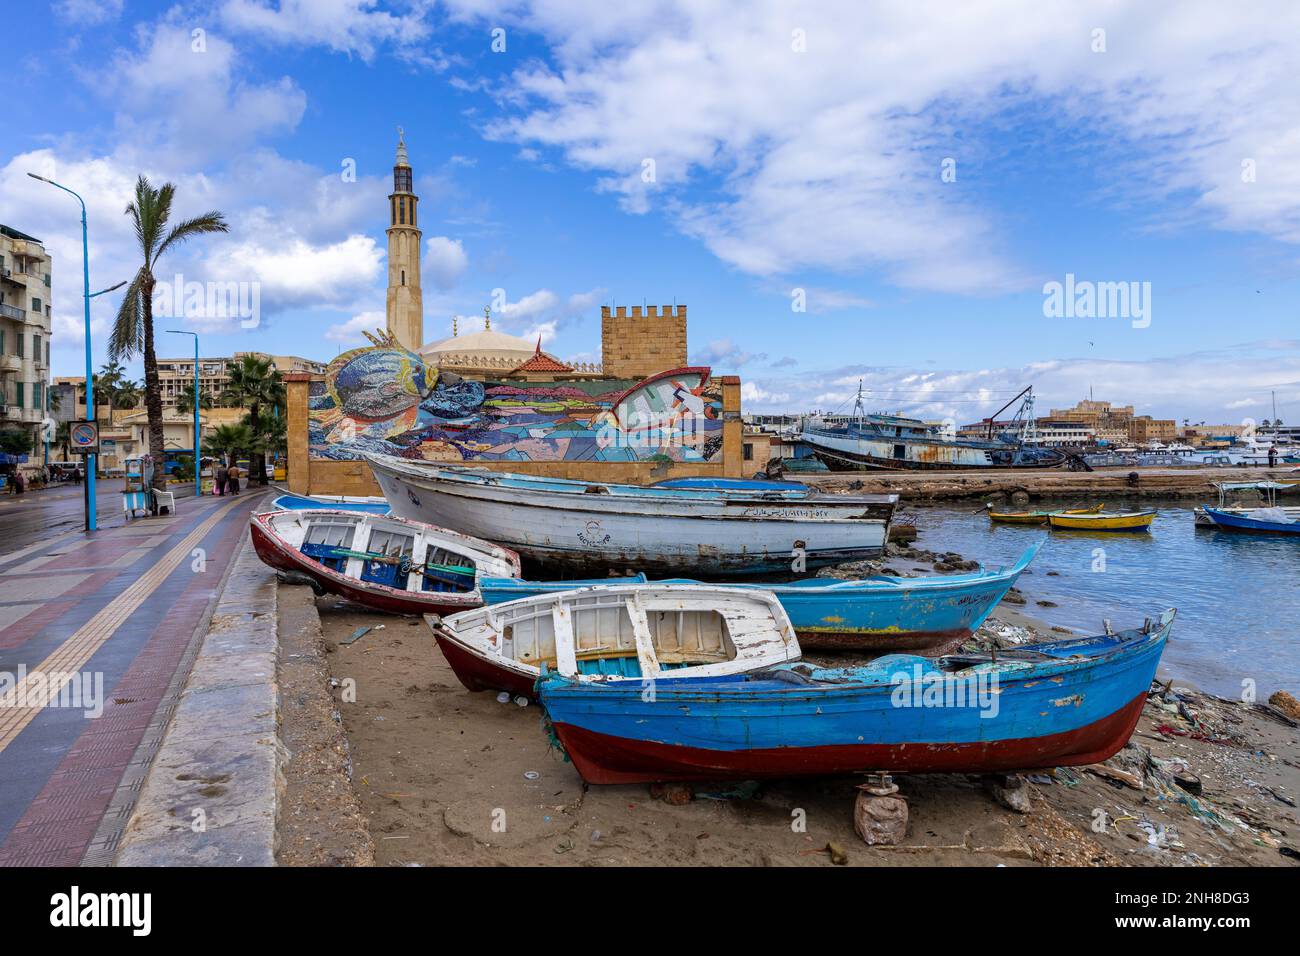 Corniche of Alexandria, the seconds largest city in Egypt. Traditional Egyptian Architecture. Africa. Stock Photo